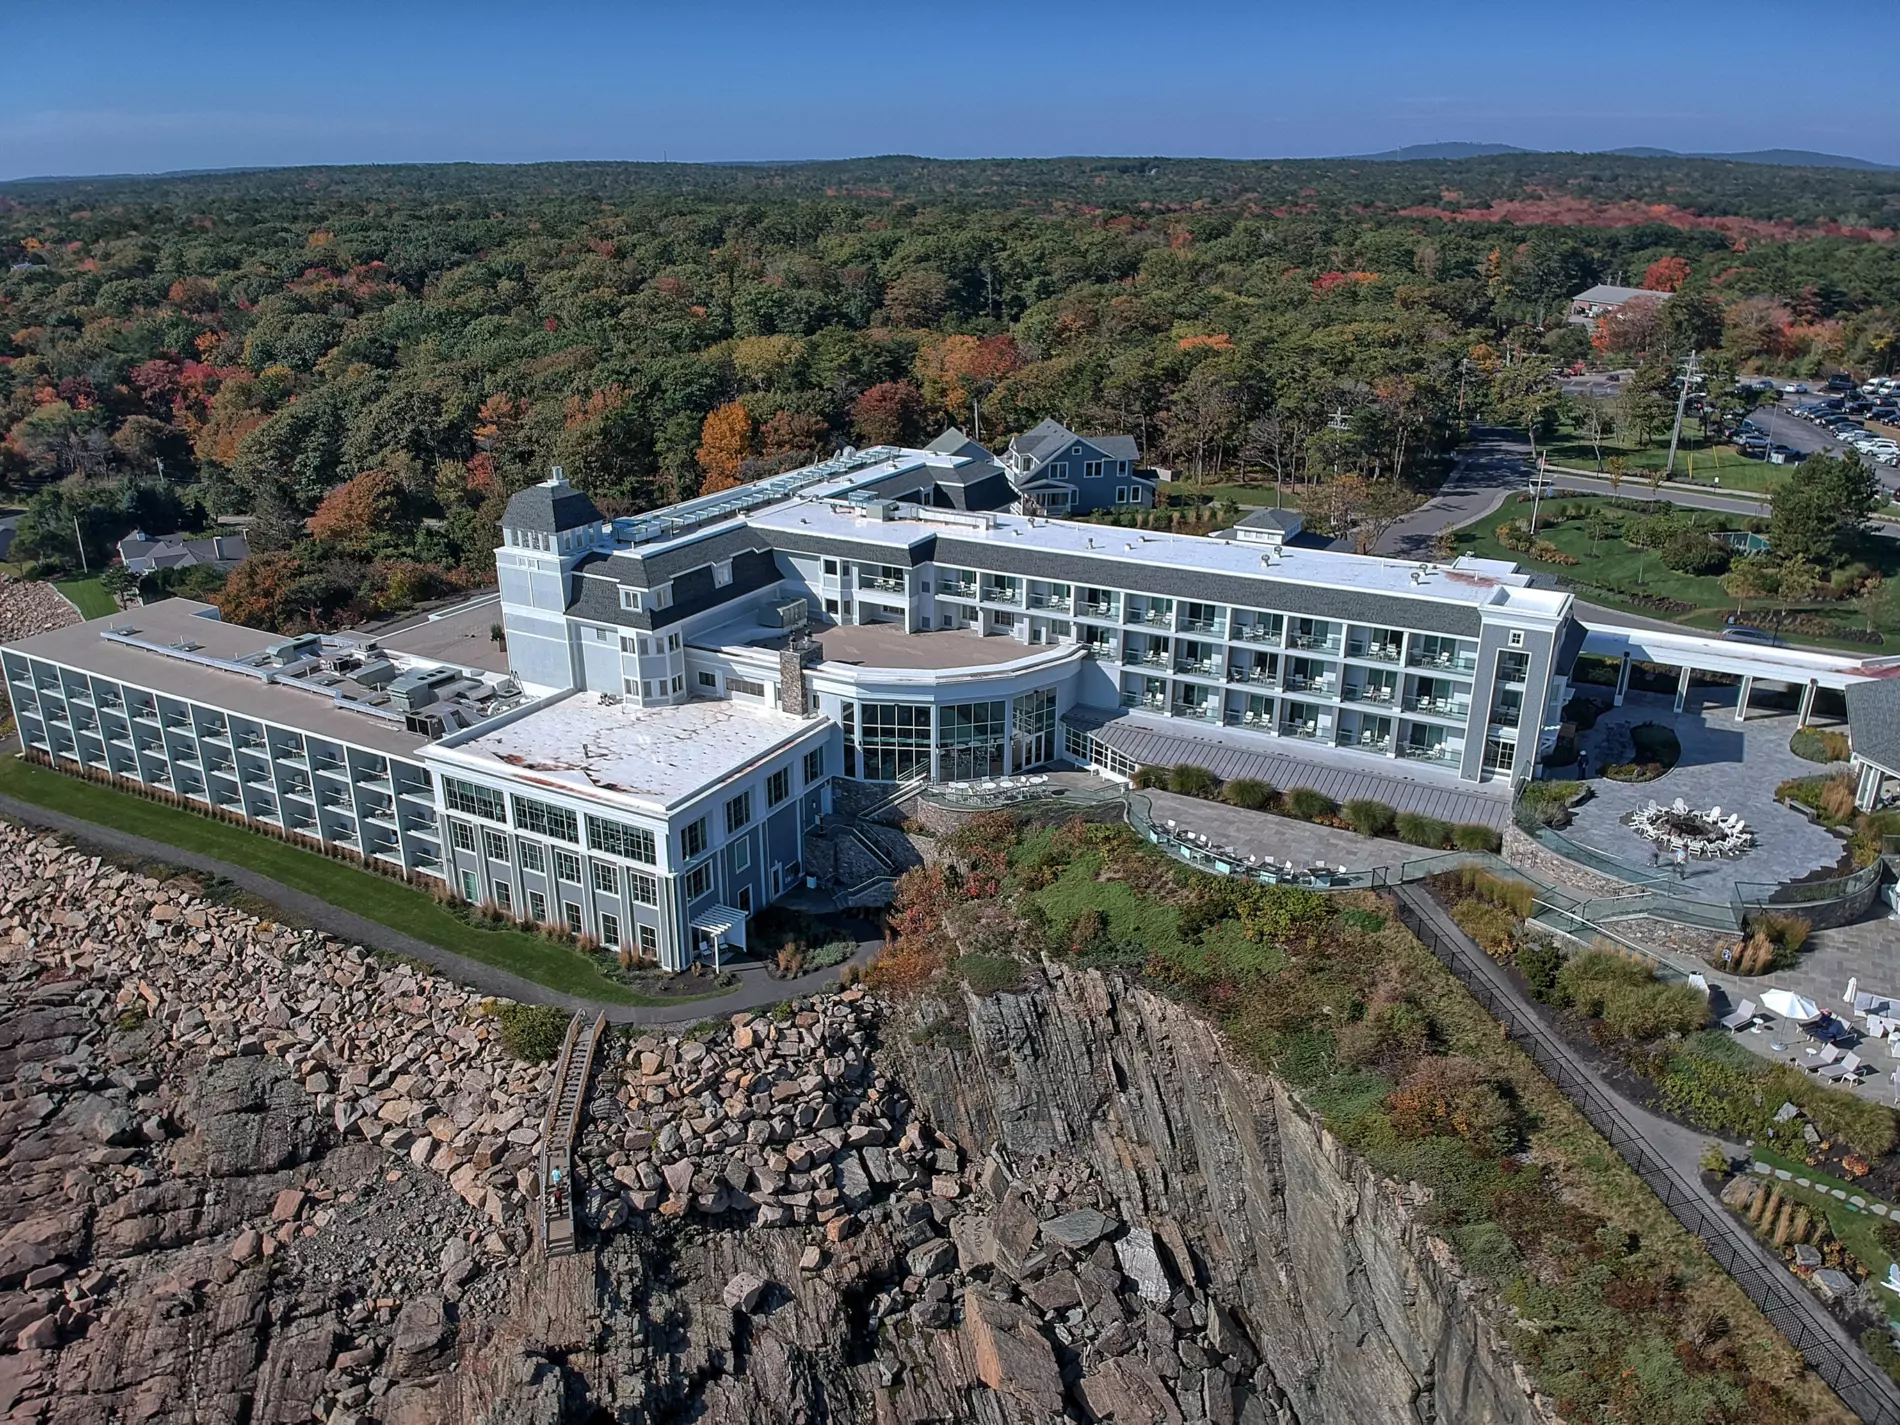 The Cliff House is a modern luxury resort in Ogunquit, Maine, and perfect for your maine wedding